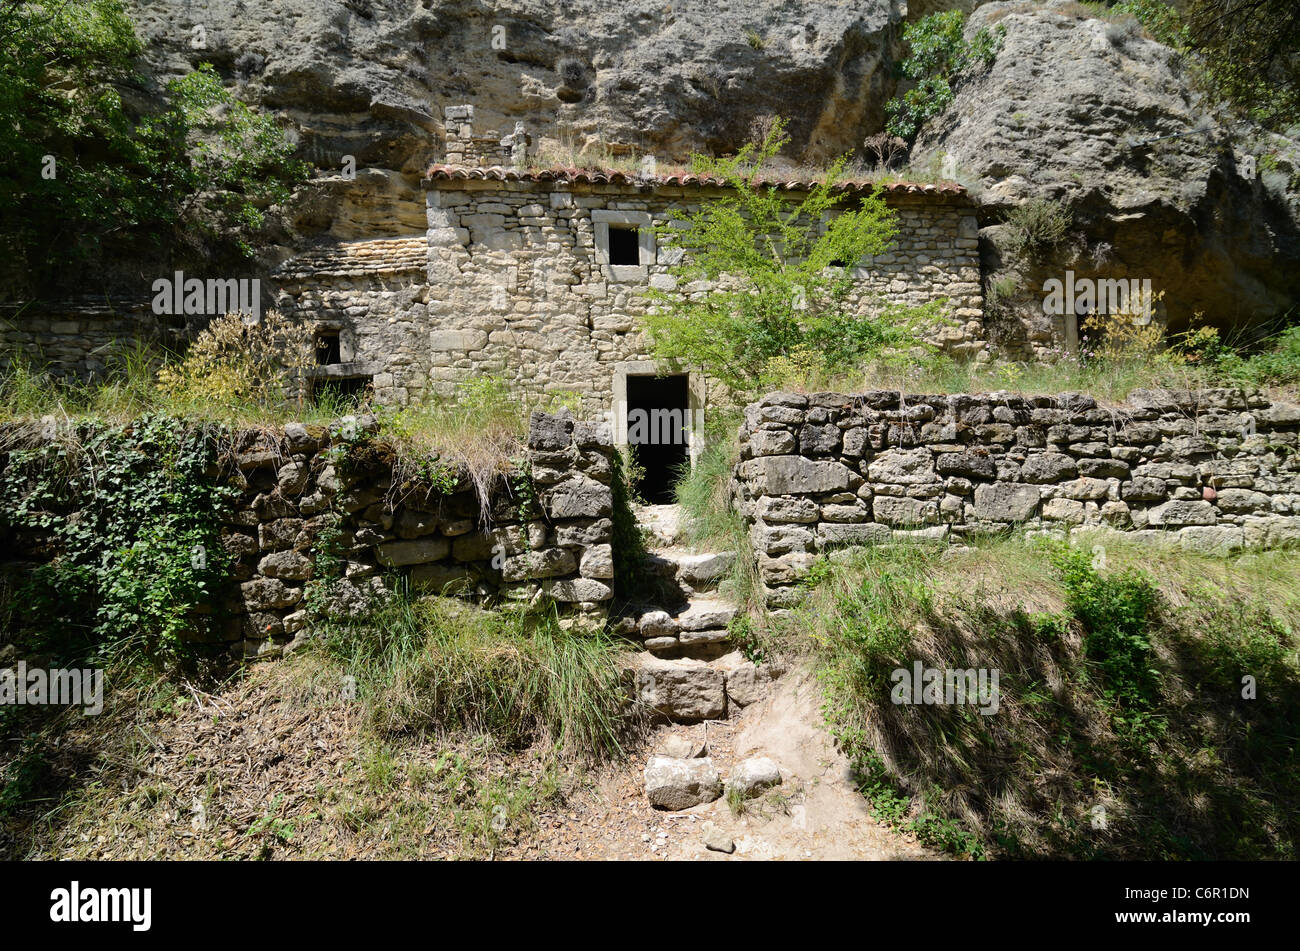 Troglodyte House built into the Cliff in the Abandoned or Deserted Village of Barry Drôme Provence France Stock Photo